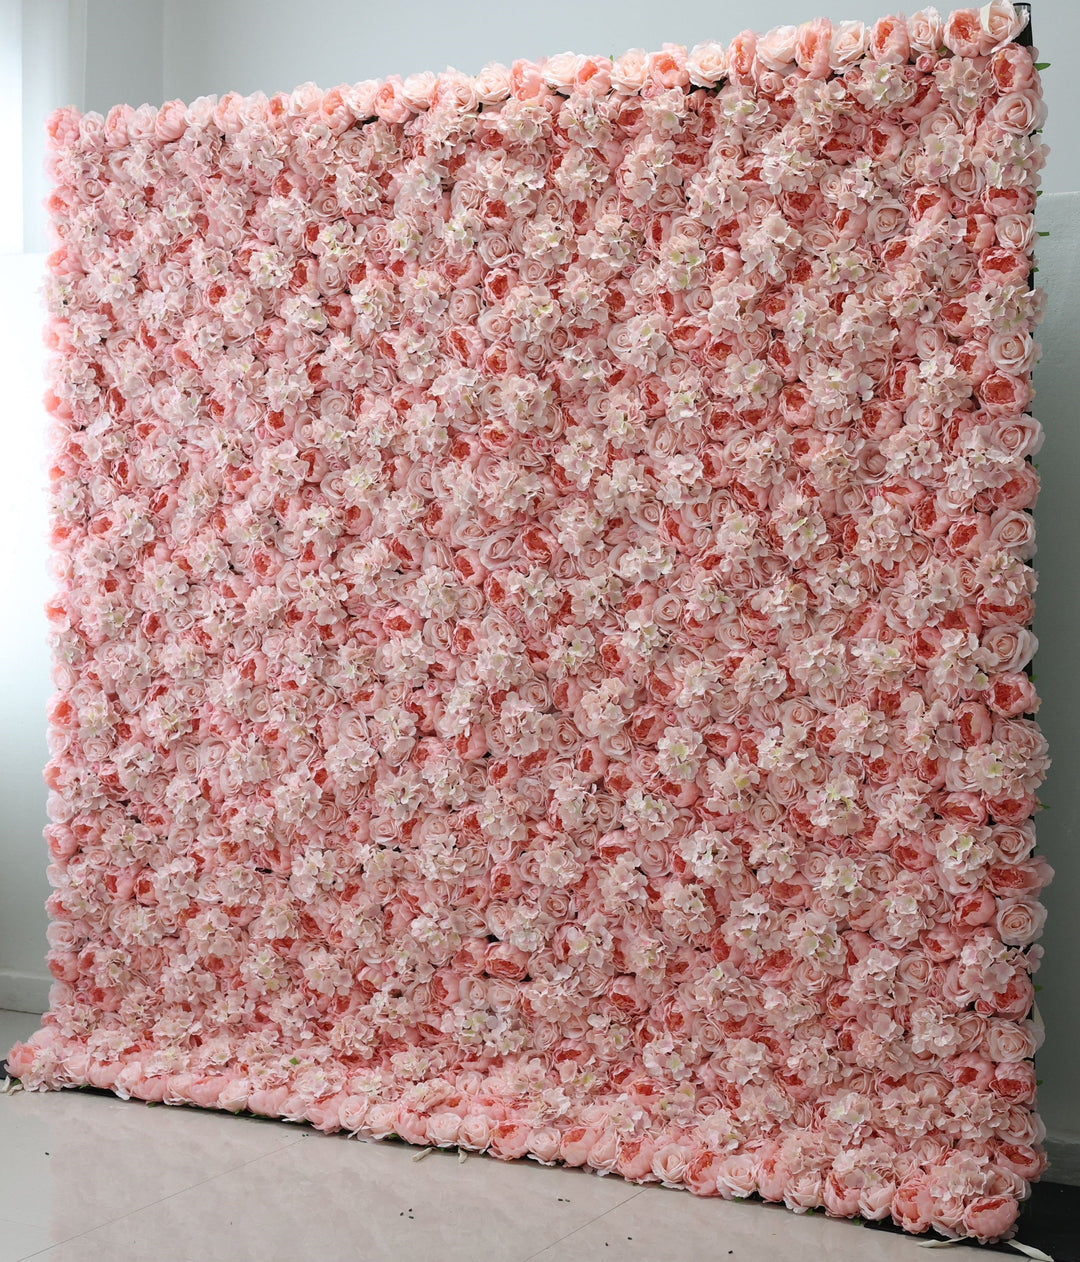 Pink Roses And Hydrangeas, Artificial Flower Wall, Wedding Party Backdrop